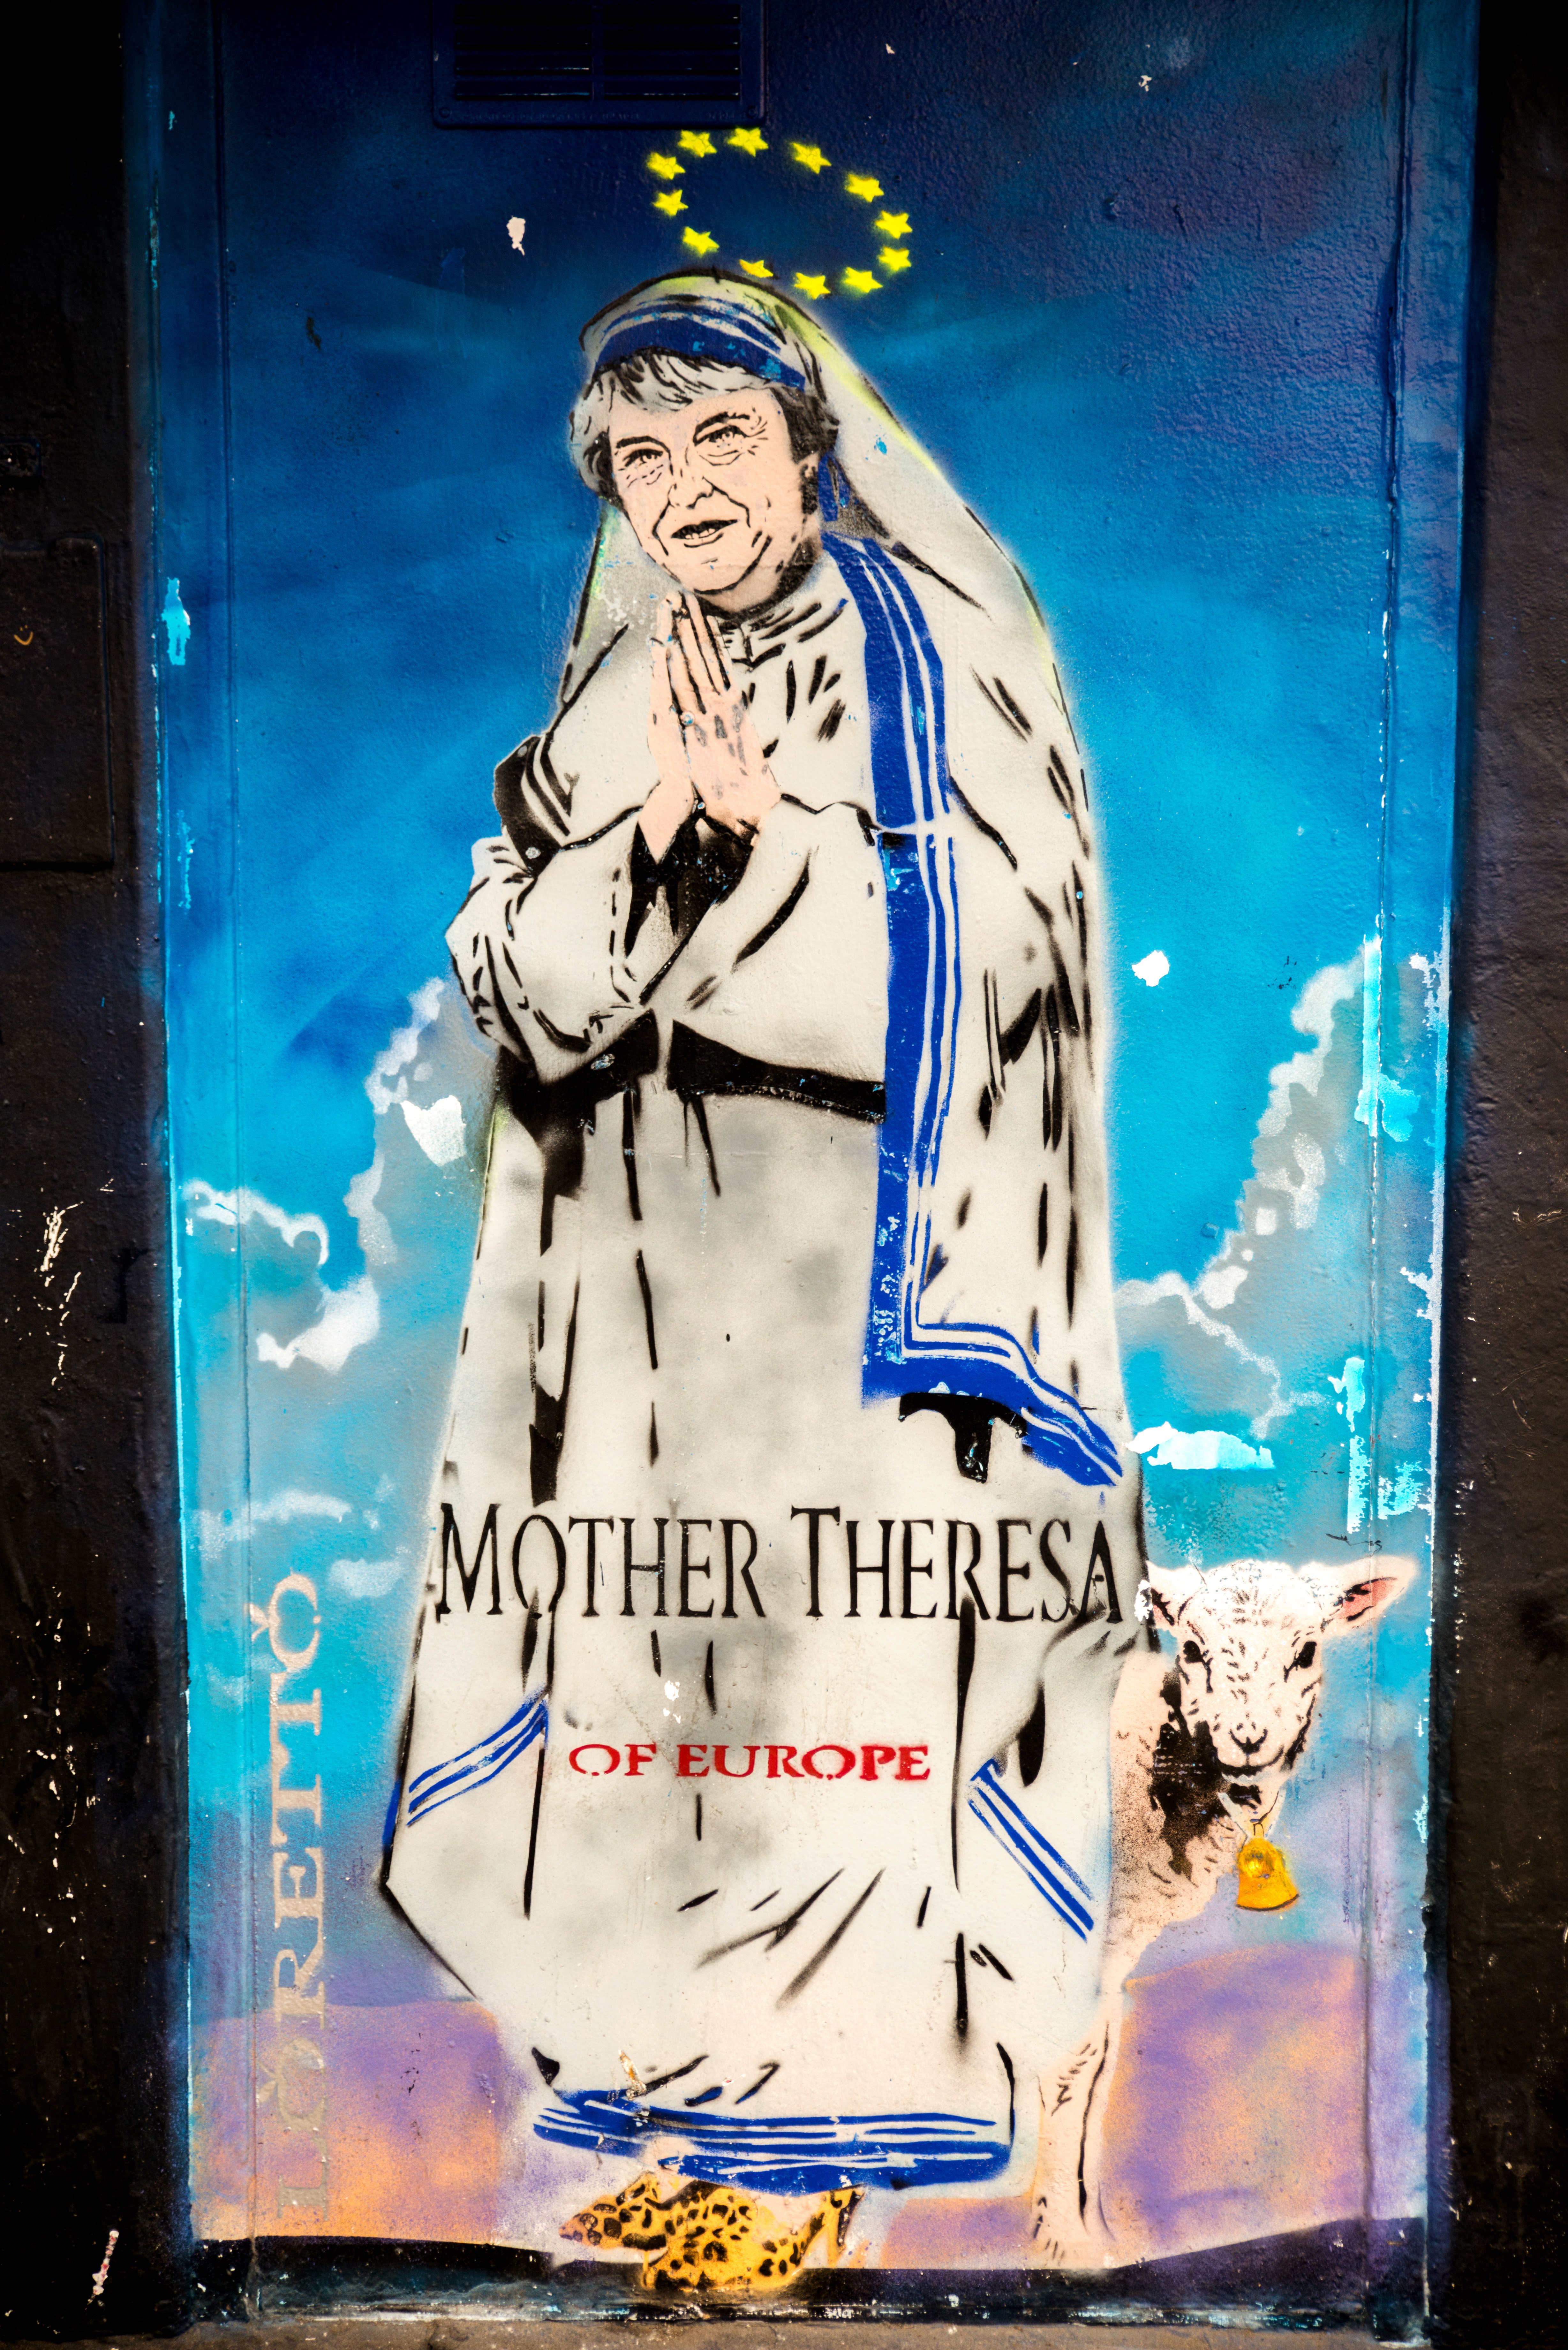 Mother Theresa of Europe graffiti depicts Theresa May as Mother Teresa, Shoreditch High Street, London, early 2018.